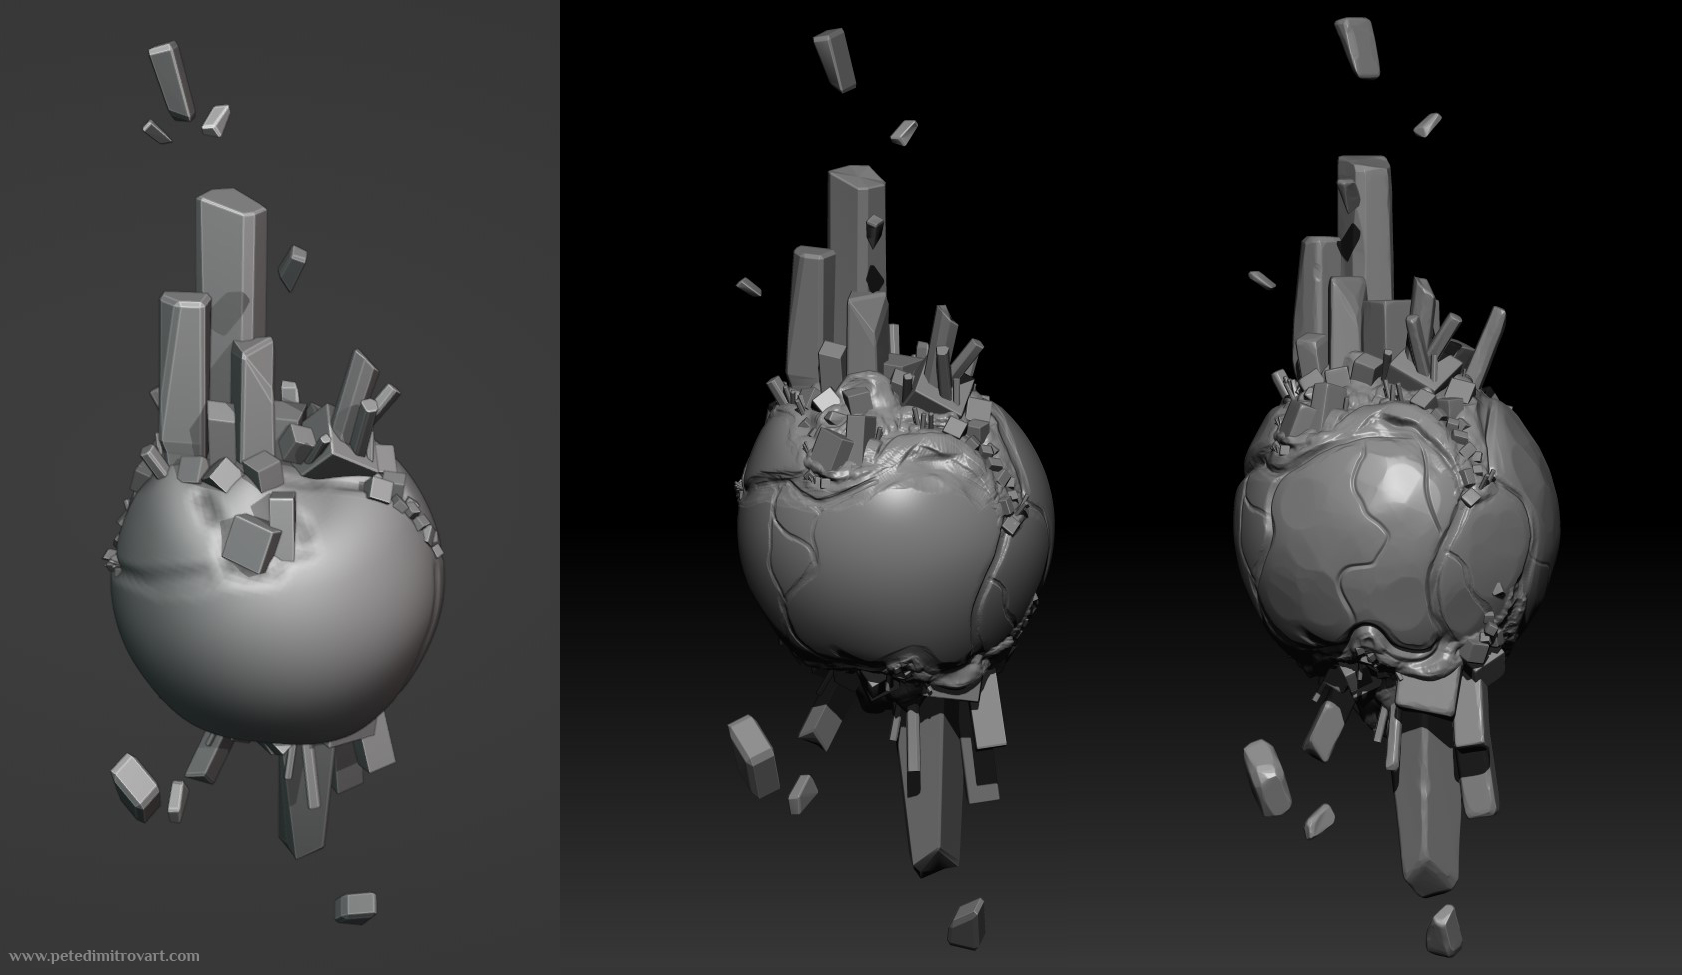 Three images put next to one another. First one is a Blender shot. Displays the blockout of the rock orb and the crystal shapes coming out of it. Next two are images taken in Zbrush, showing sculpt pass on those same shapes. The rock orb now has dug crevices and details that it didn’t have in the Blender version.